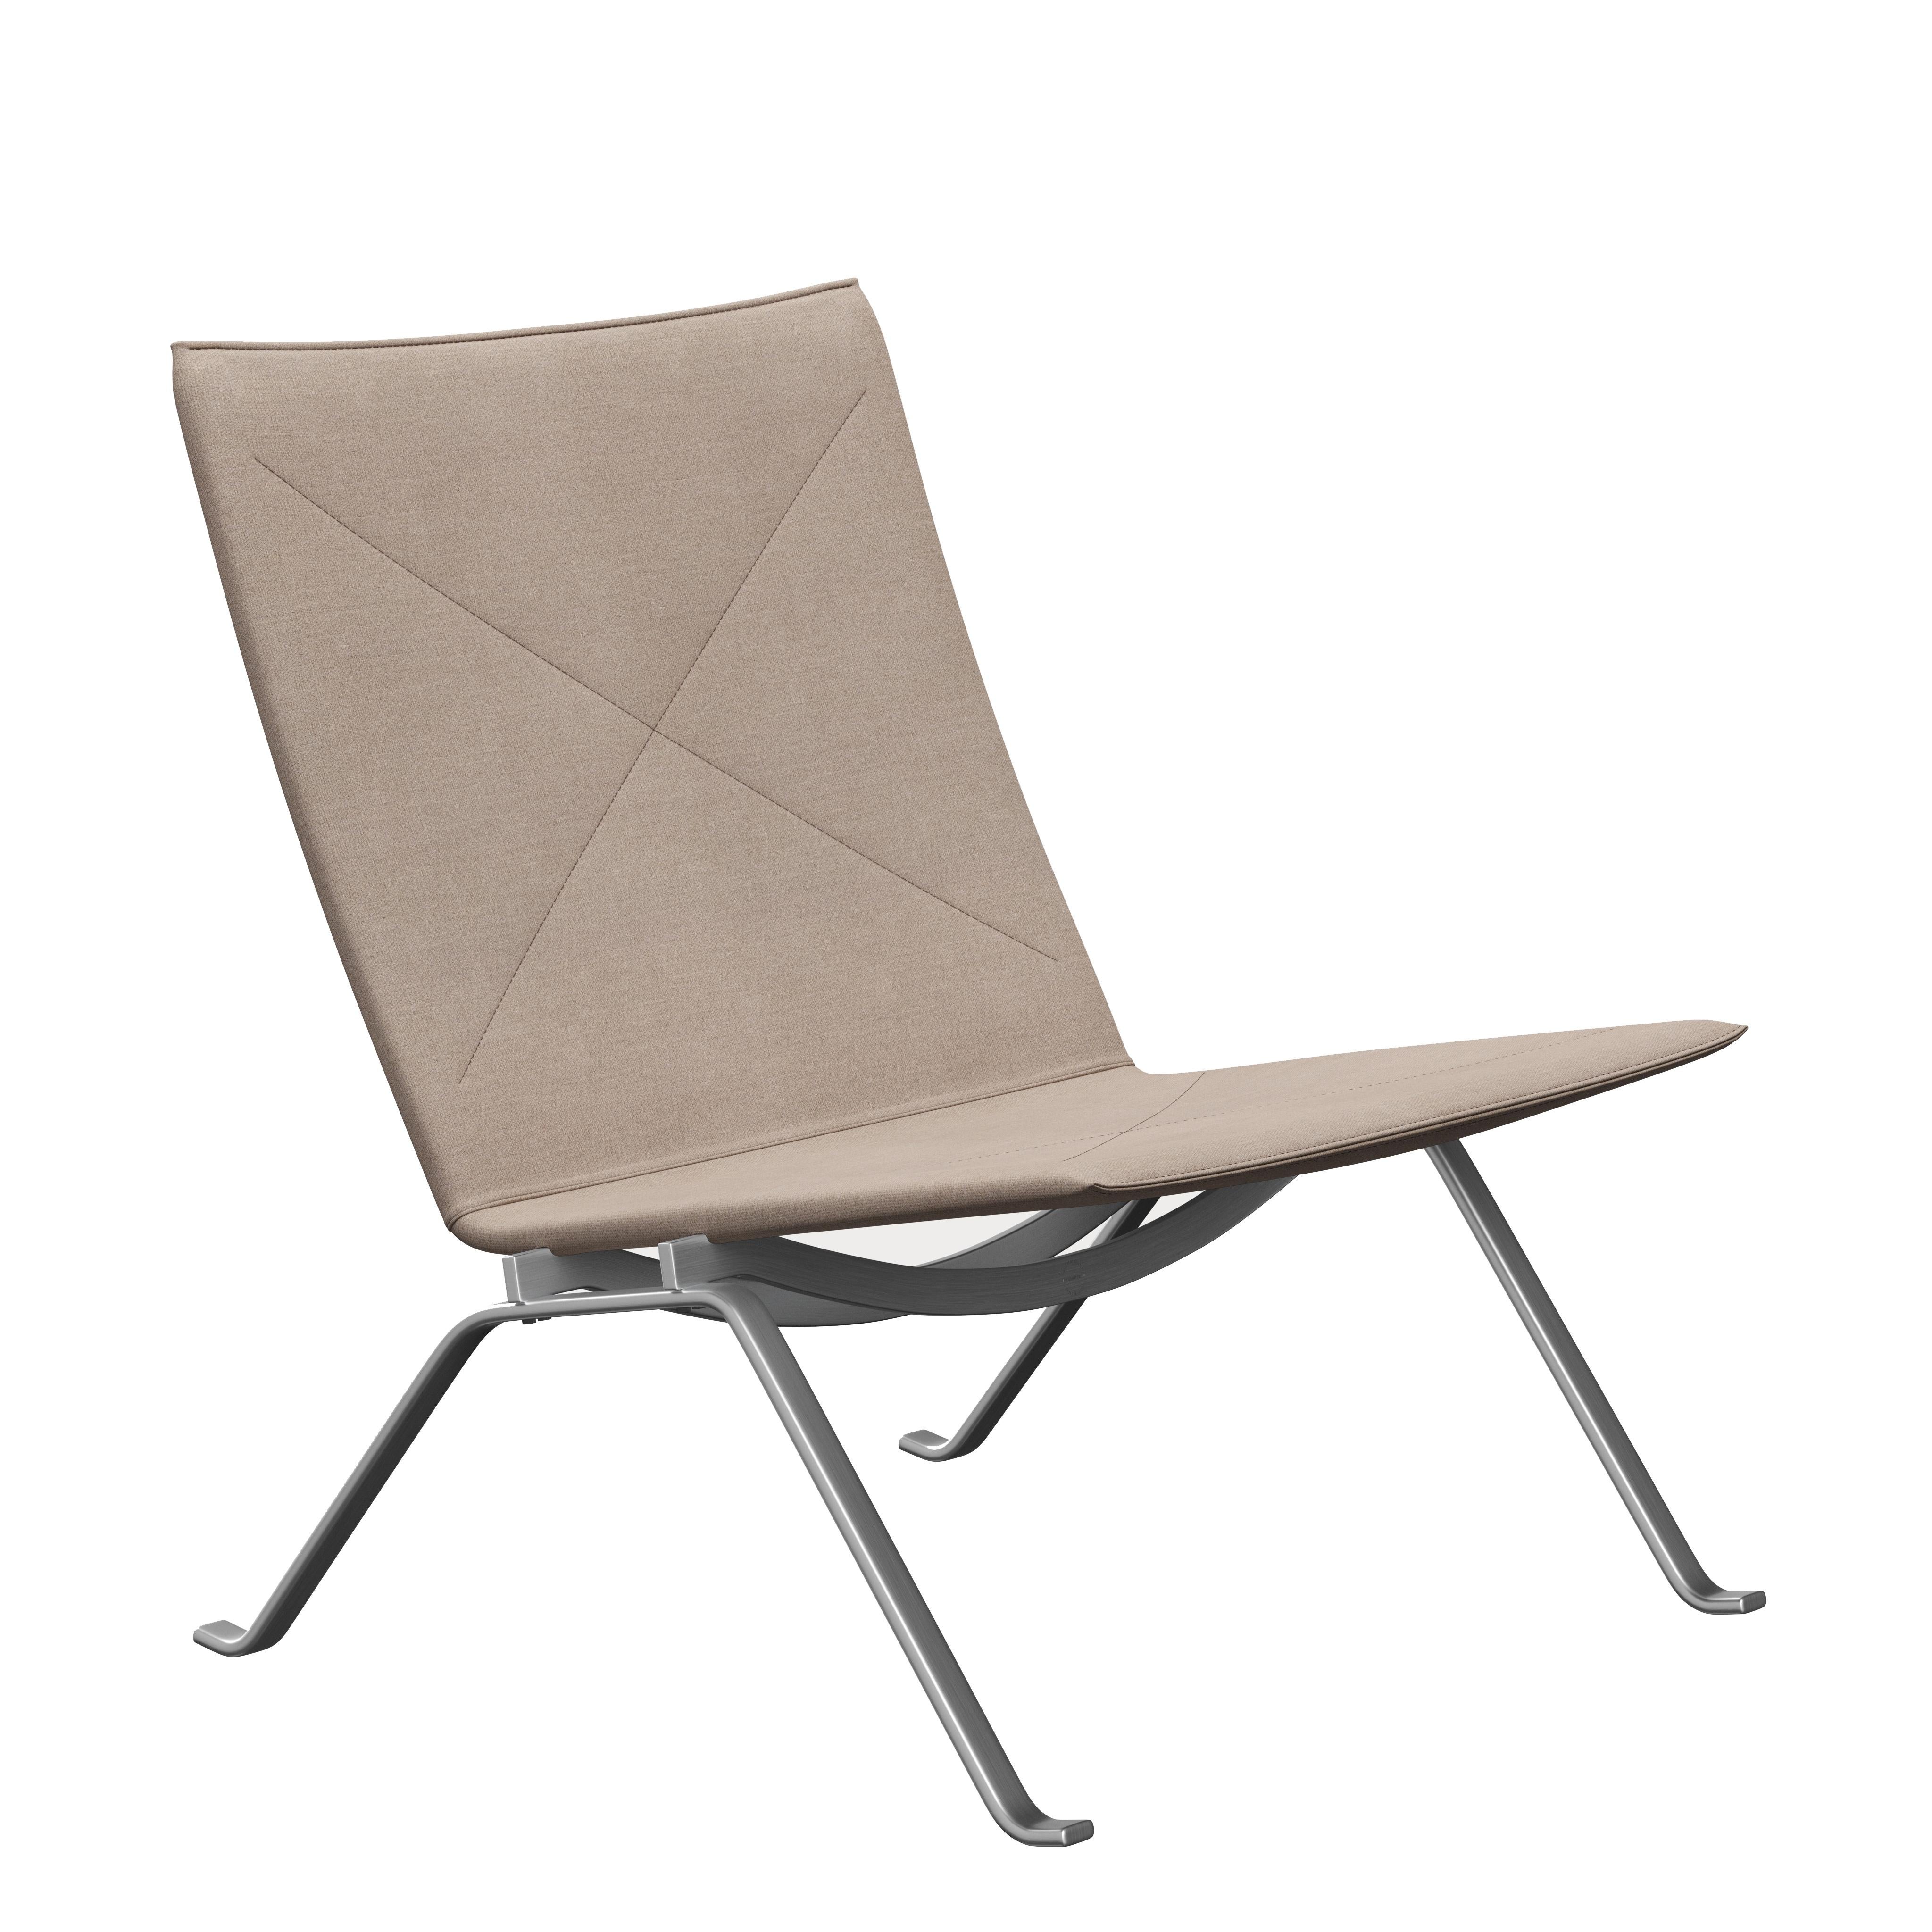 Poul Kjærholm 'PK22' Lounge Chair for Fritz Hansen in Canvas In New Condition For Sale In Glendale, CA